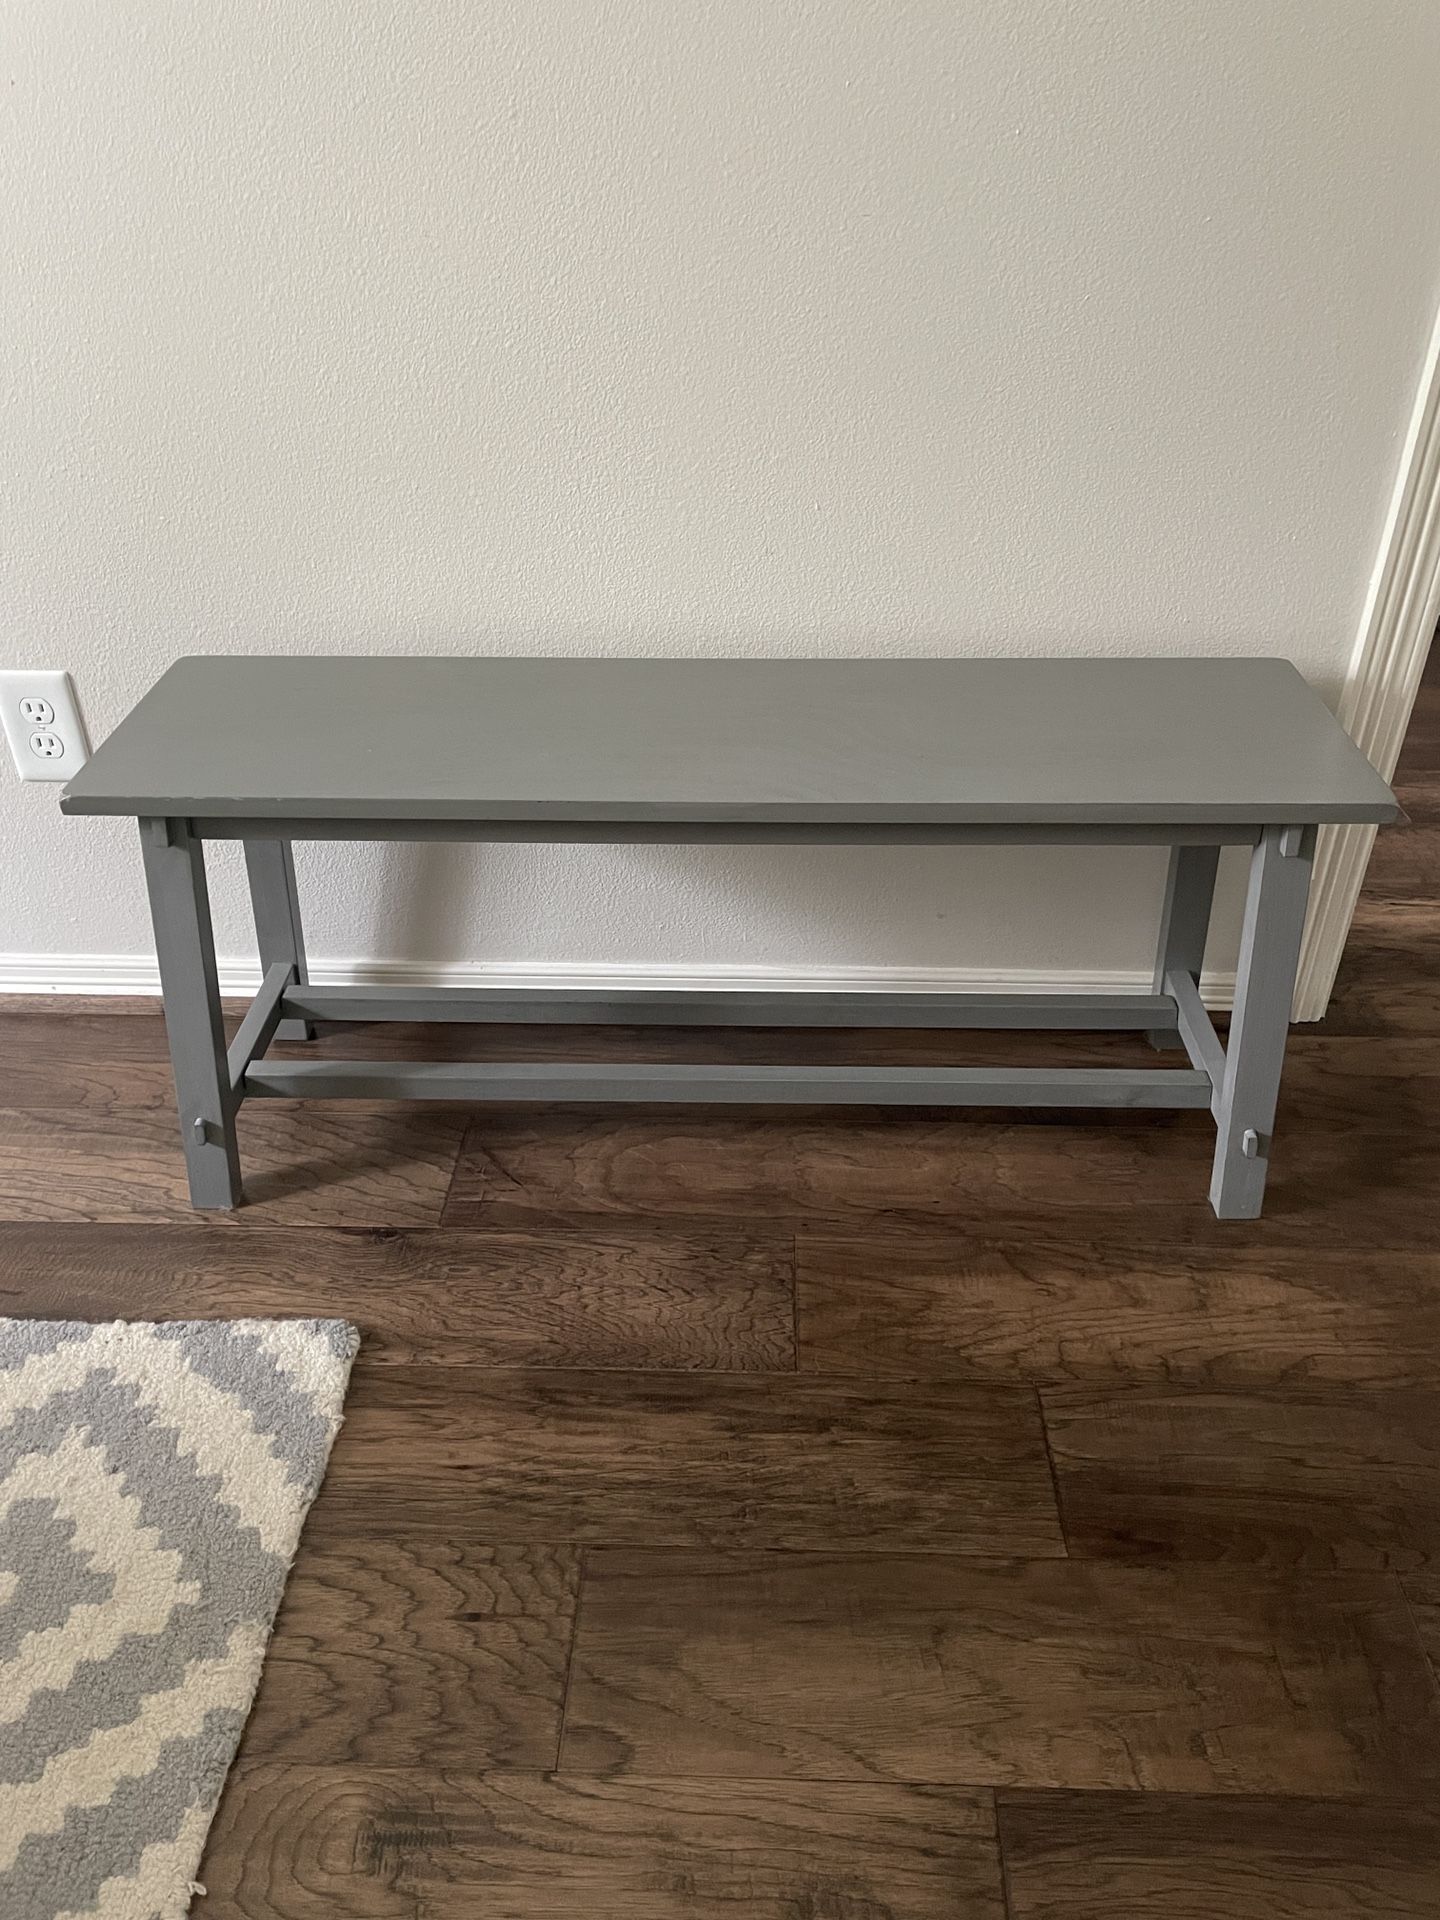 Gray Wooden Bench